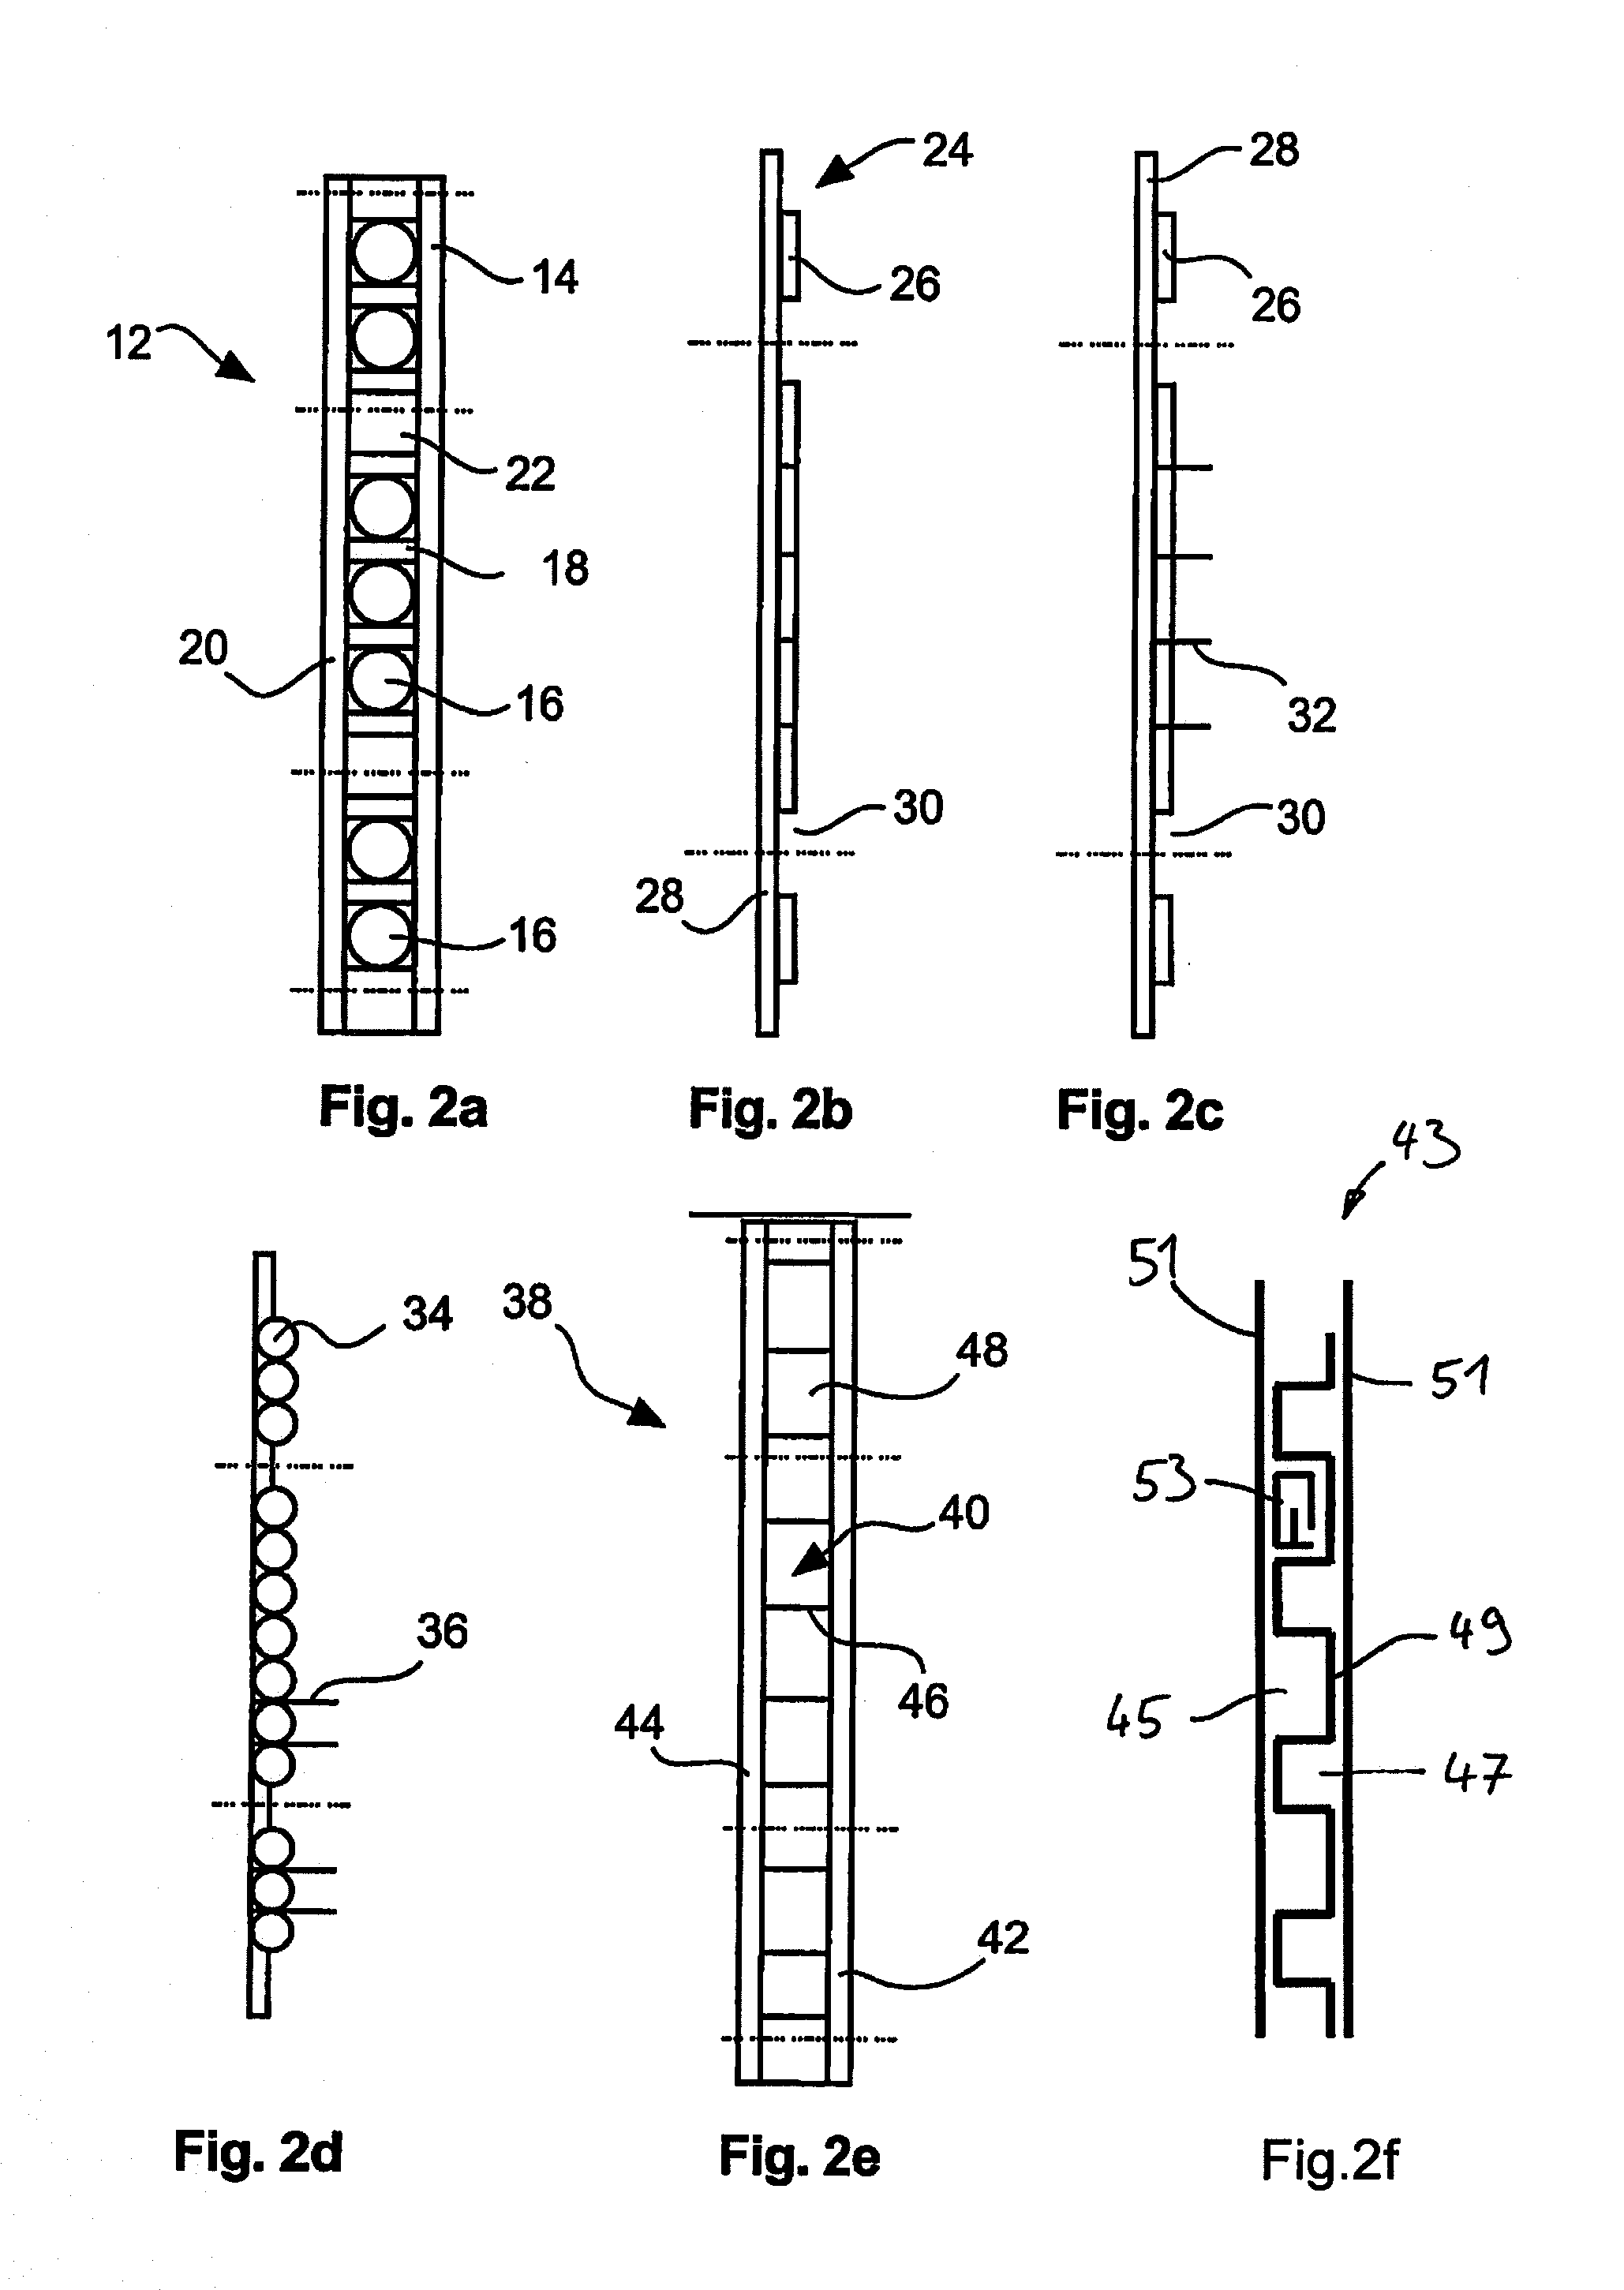 Heat exchanger for the outer skin of an aircraft